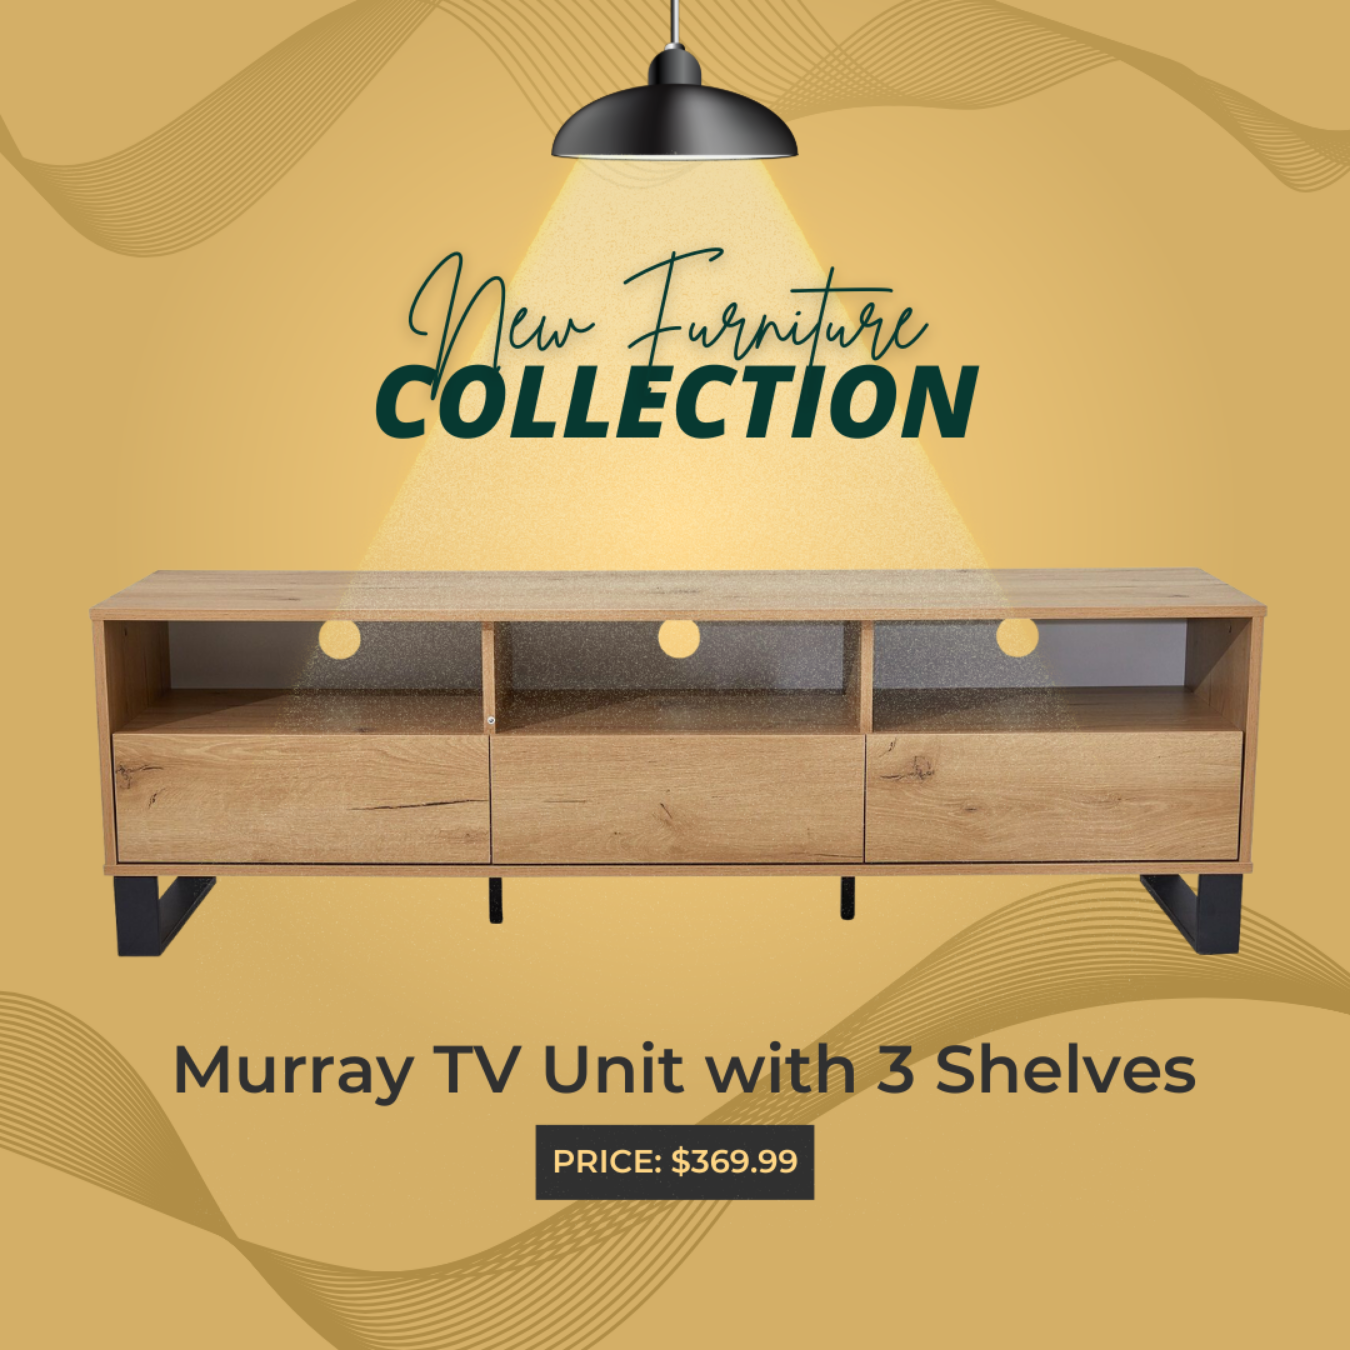 It is Simple and Stylish Design with Murray TV Unit with 3 Shelves